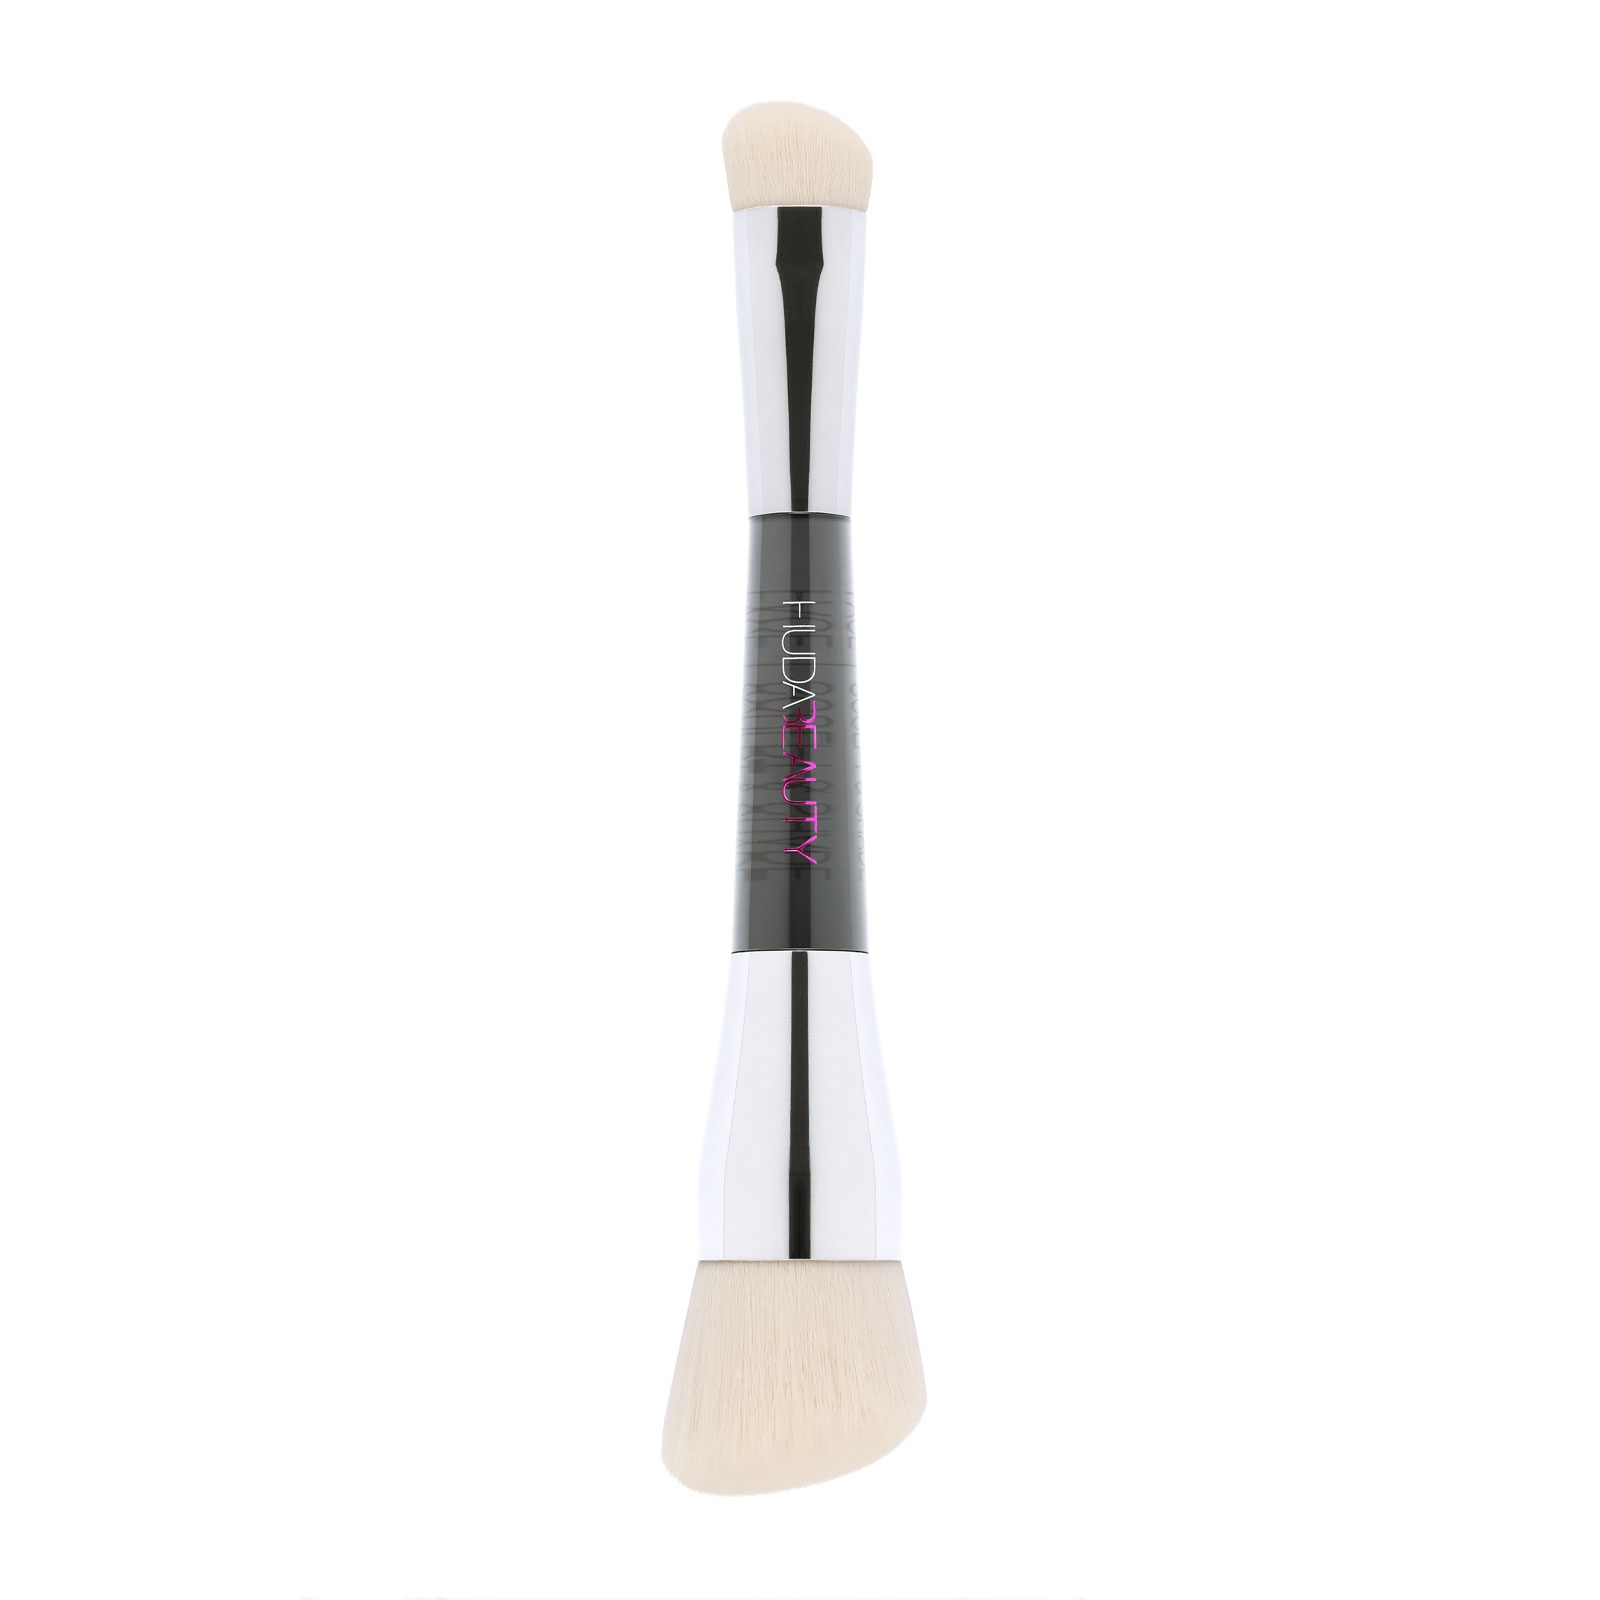 Huda Beauty Dual-Ended Contour & Bronze Complexion Brush